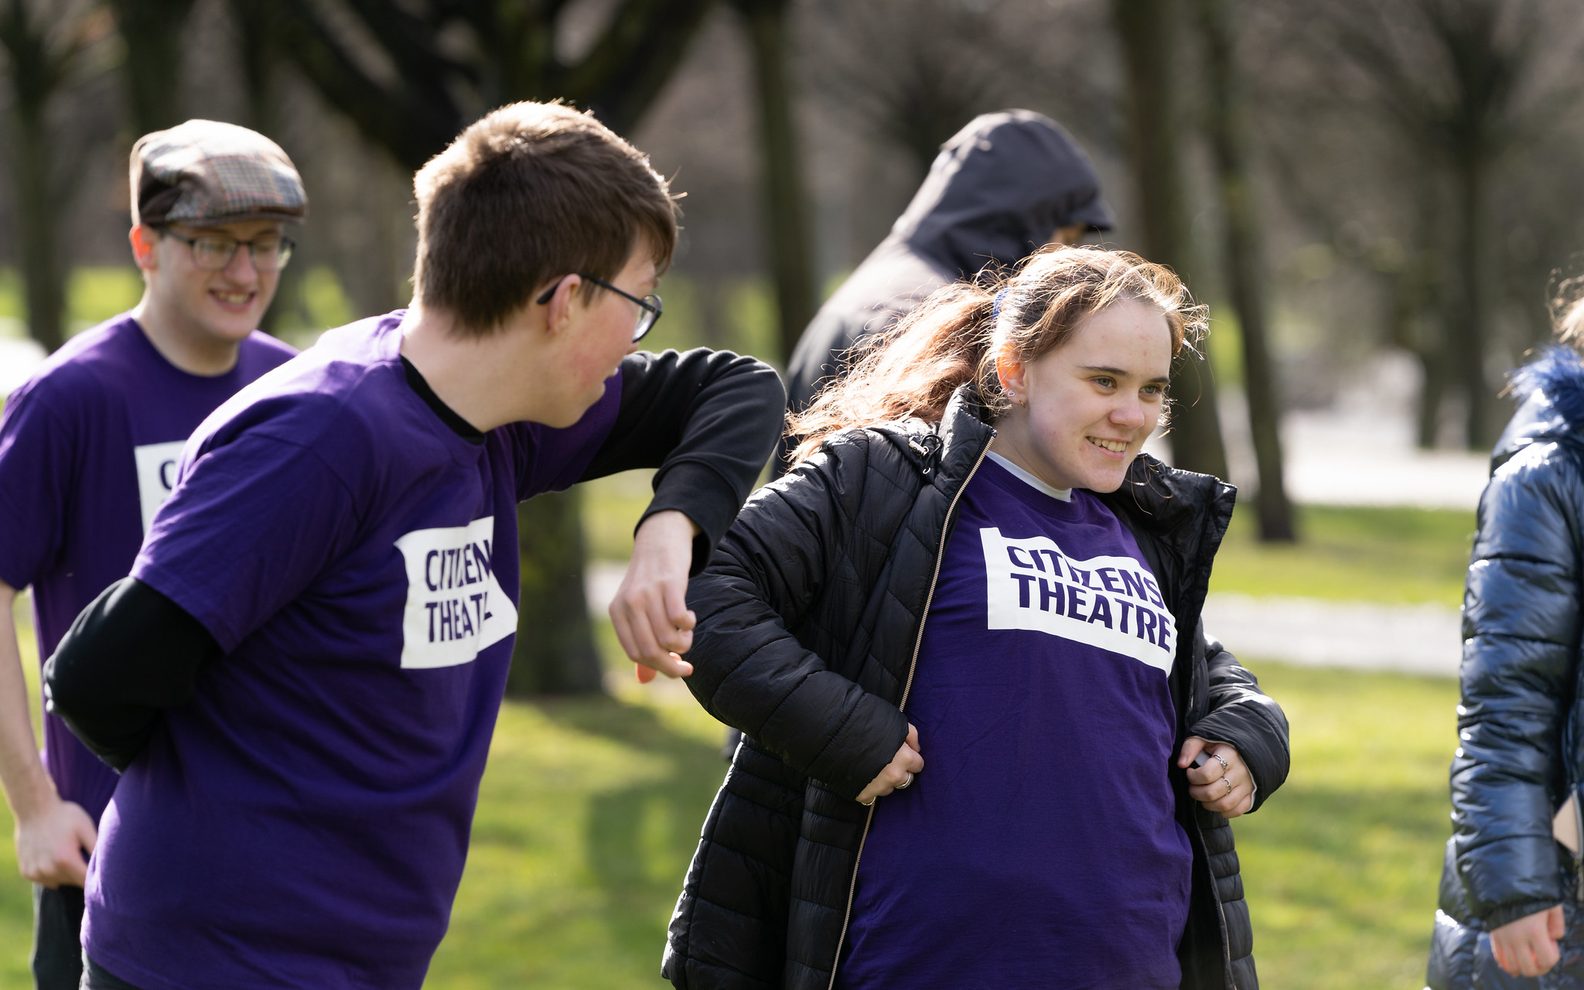 Young people from the Saturday Citizens group in a park. Two of them are in the foreground laughing, and all are wearing purple Citizens Theatre t-shirts.